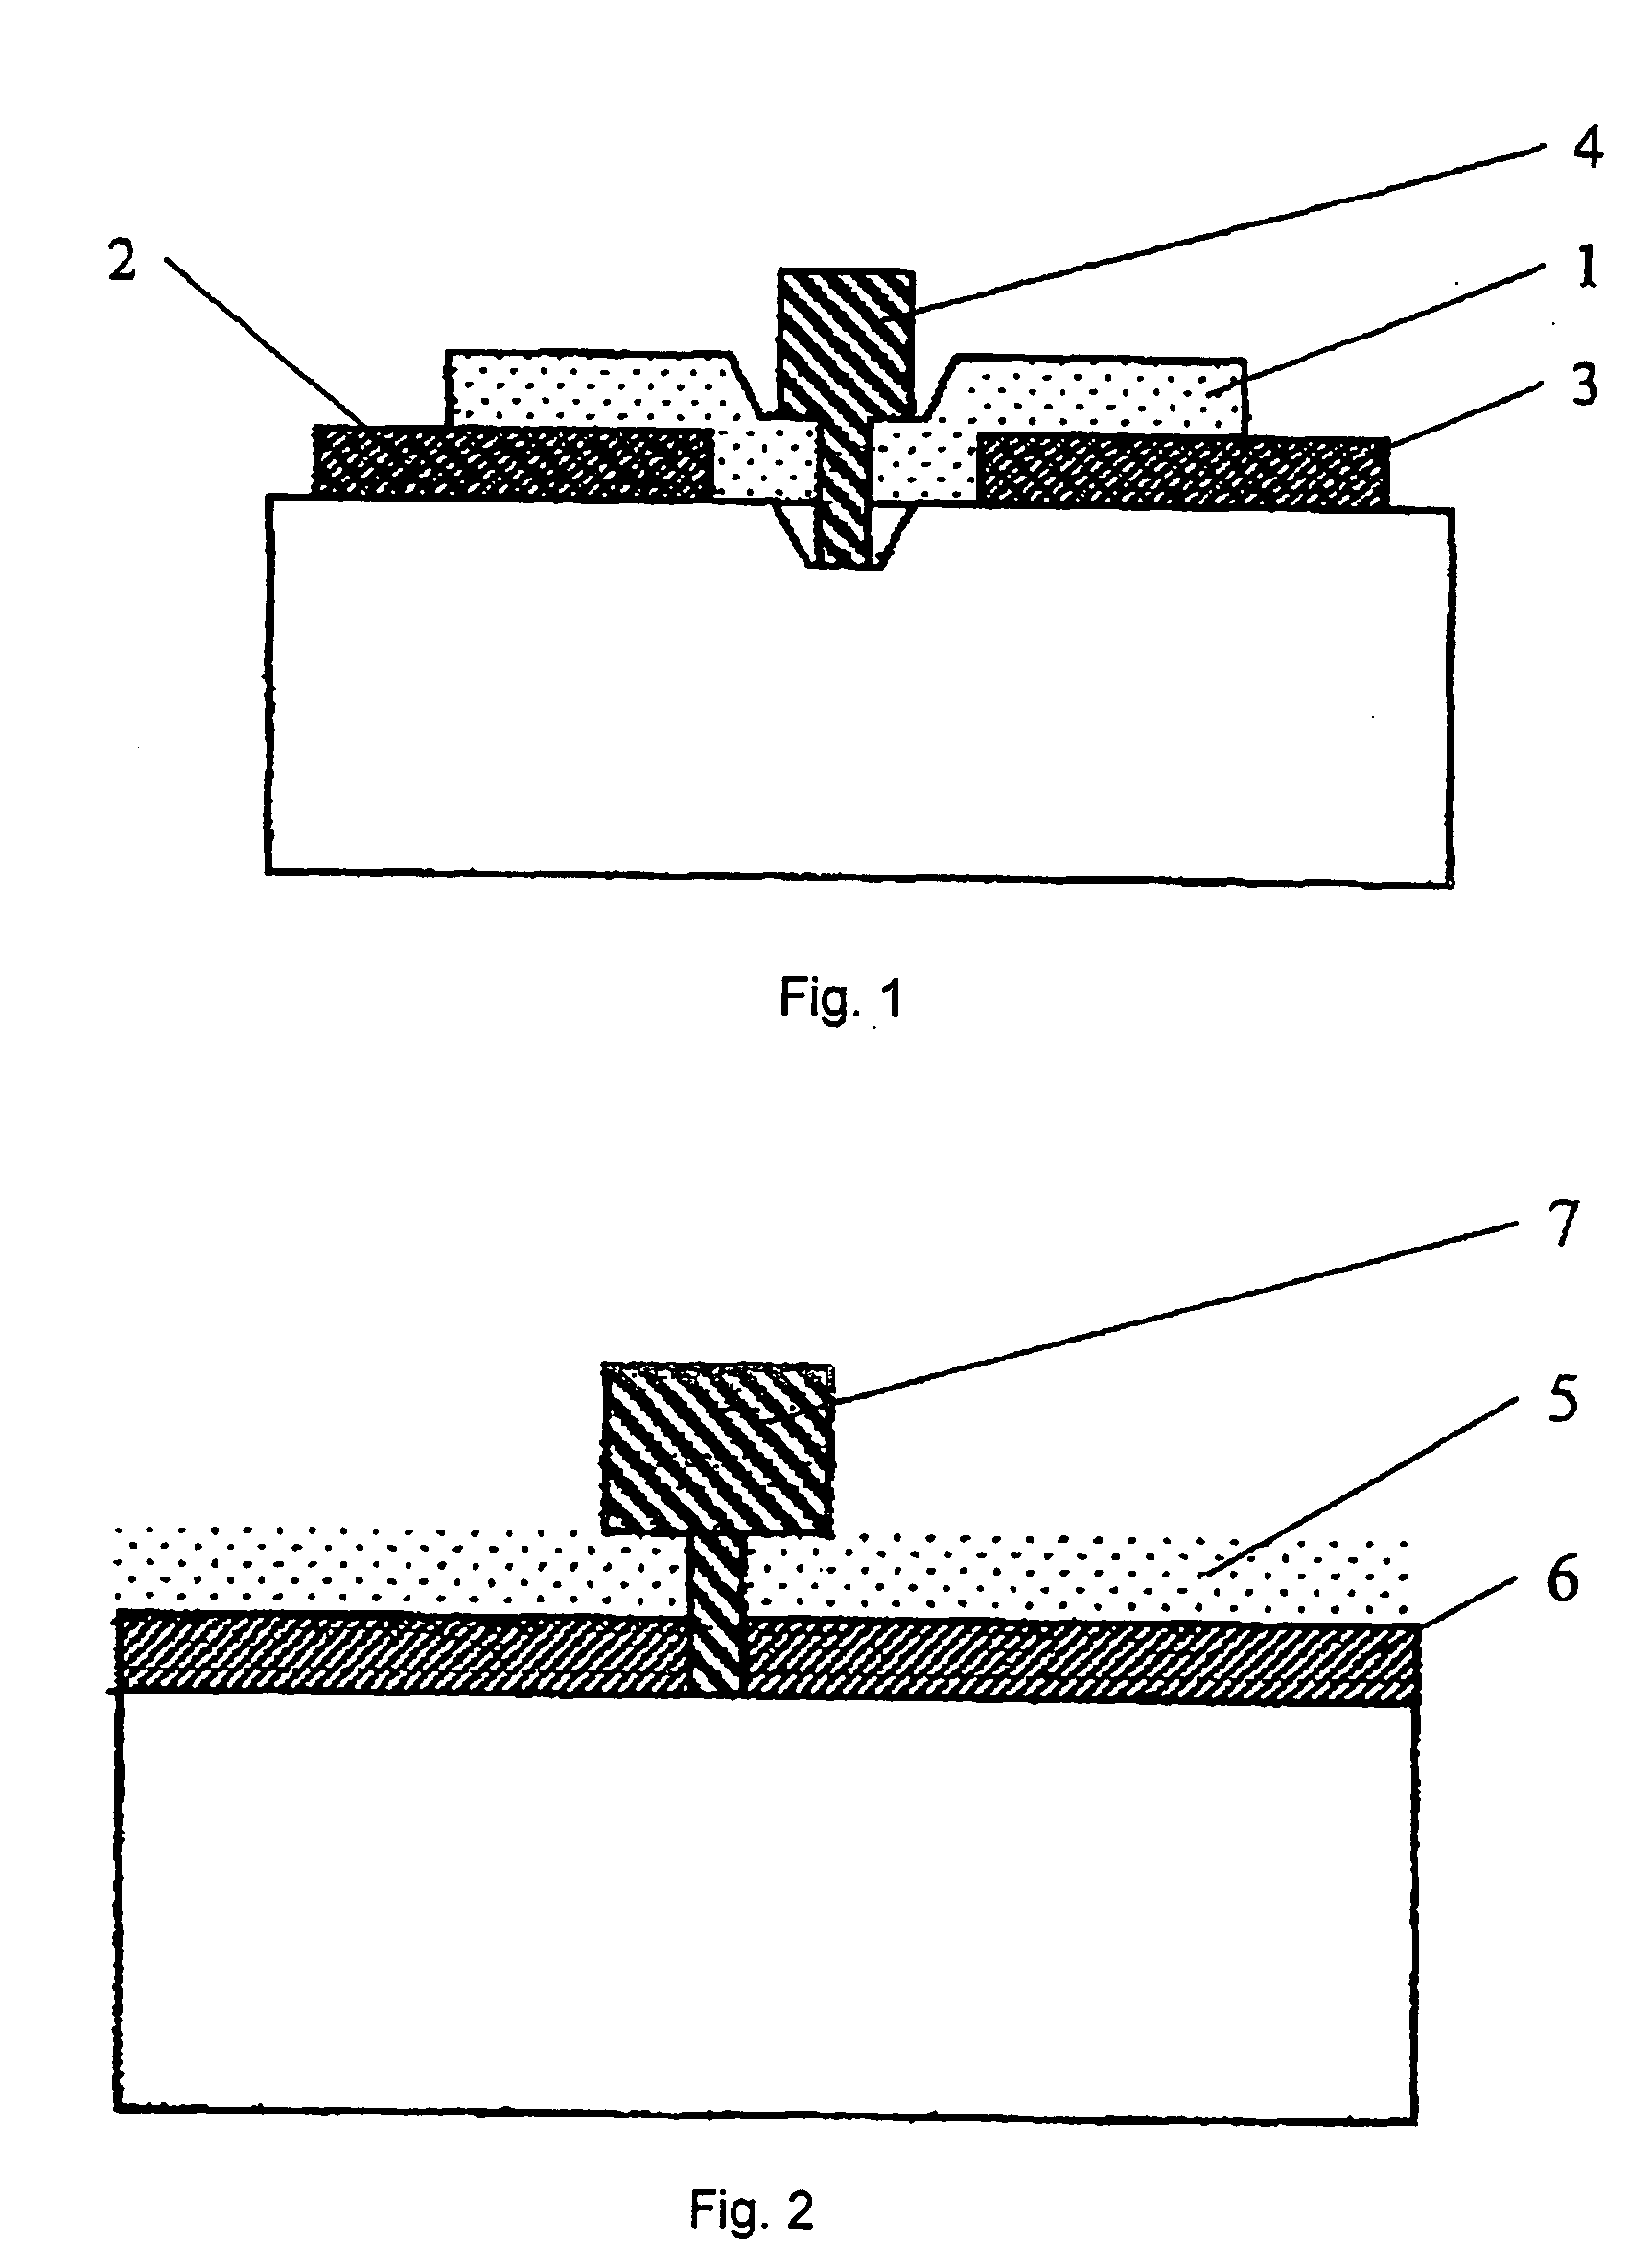 ECR-plasma source and methods for treatment of semiconductor structures